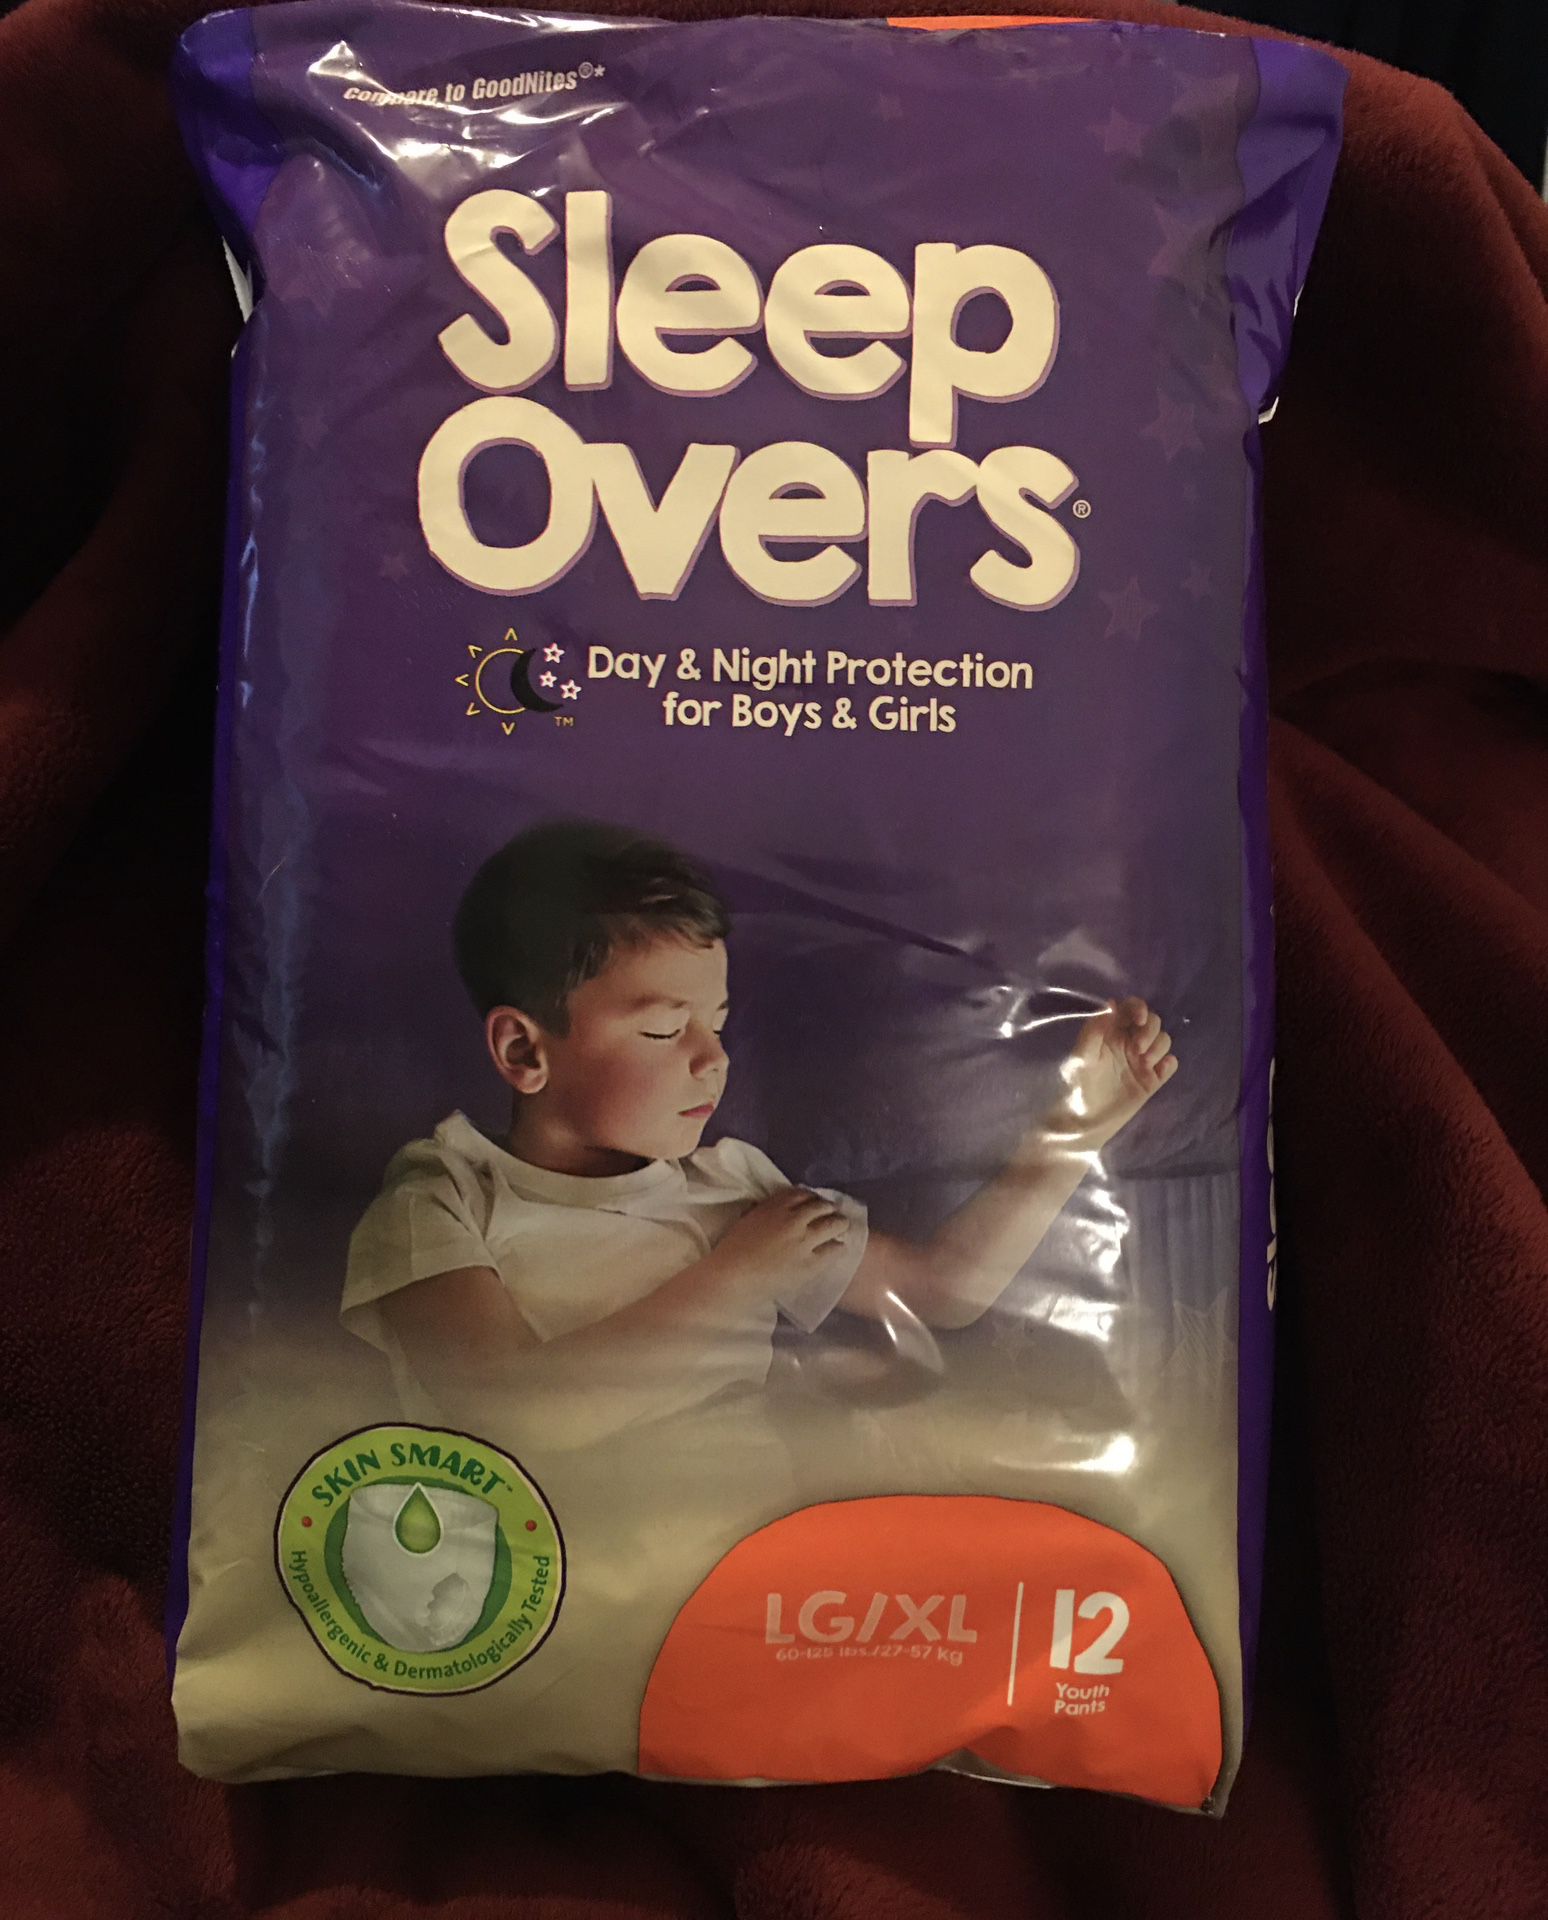 ADULT/CHILD SLEEPOVERS UNISEX DAY & NIGHT PROTECTION 12 PACK PULL UPS SIZE LG/XL 60-125 LBS. Retails for $17 per pack Selling for $5 per pack